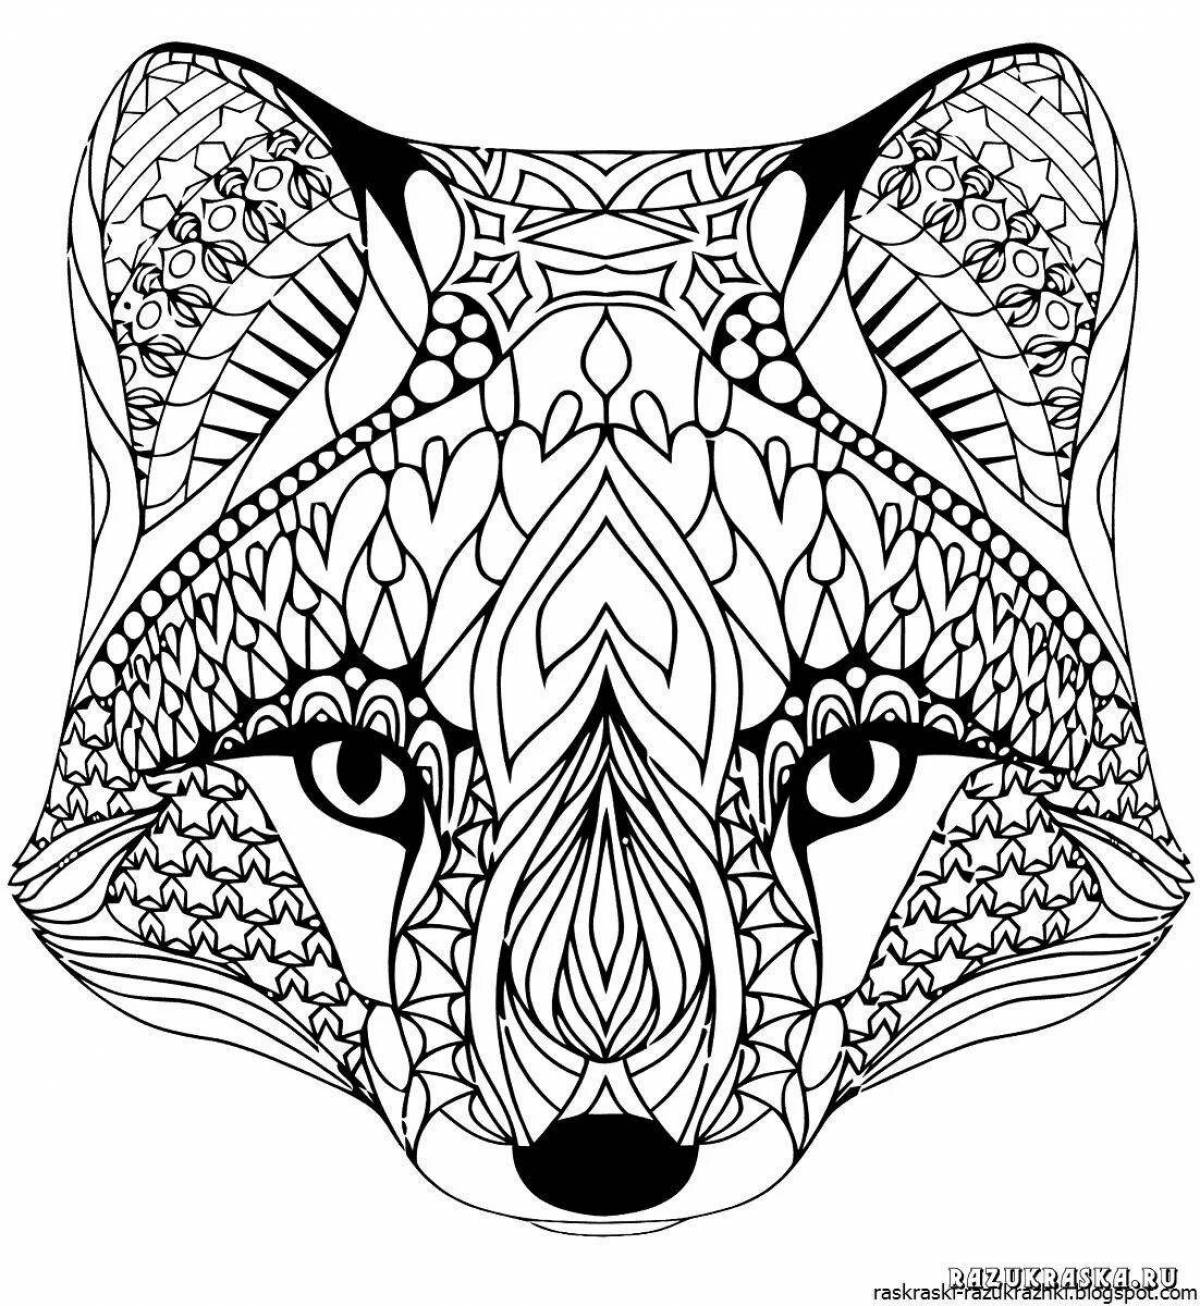 Creative adult lung coloring page